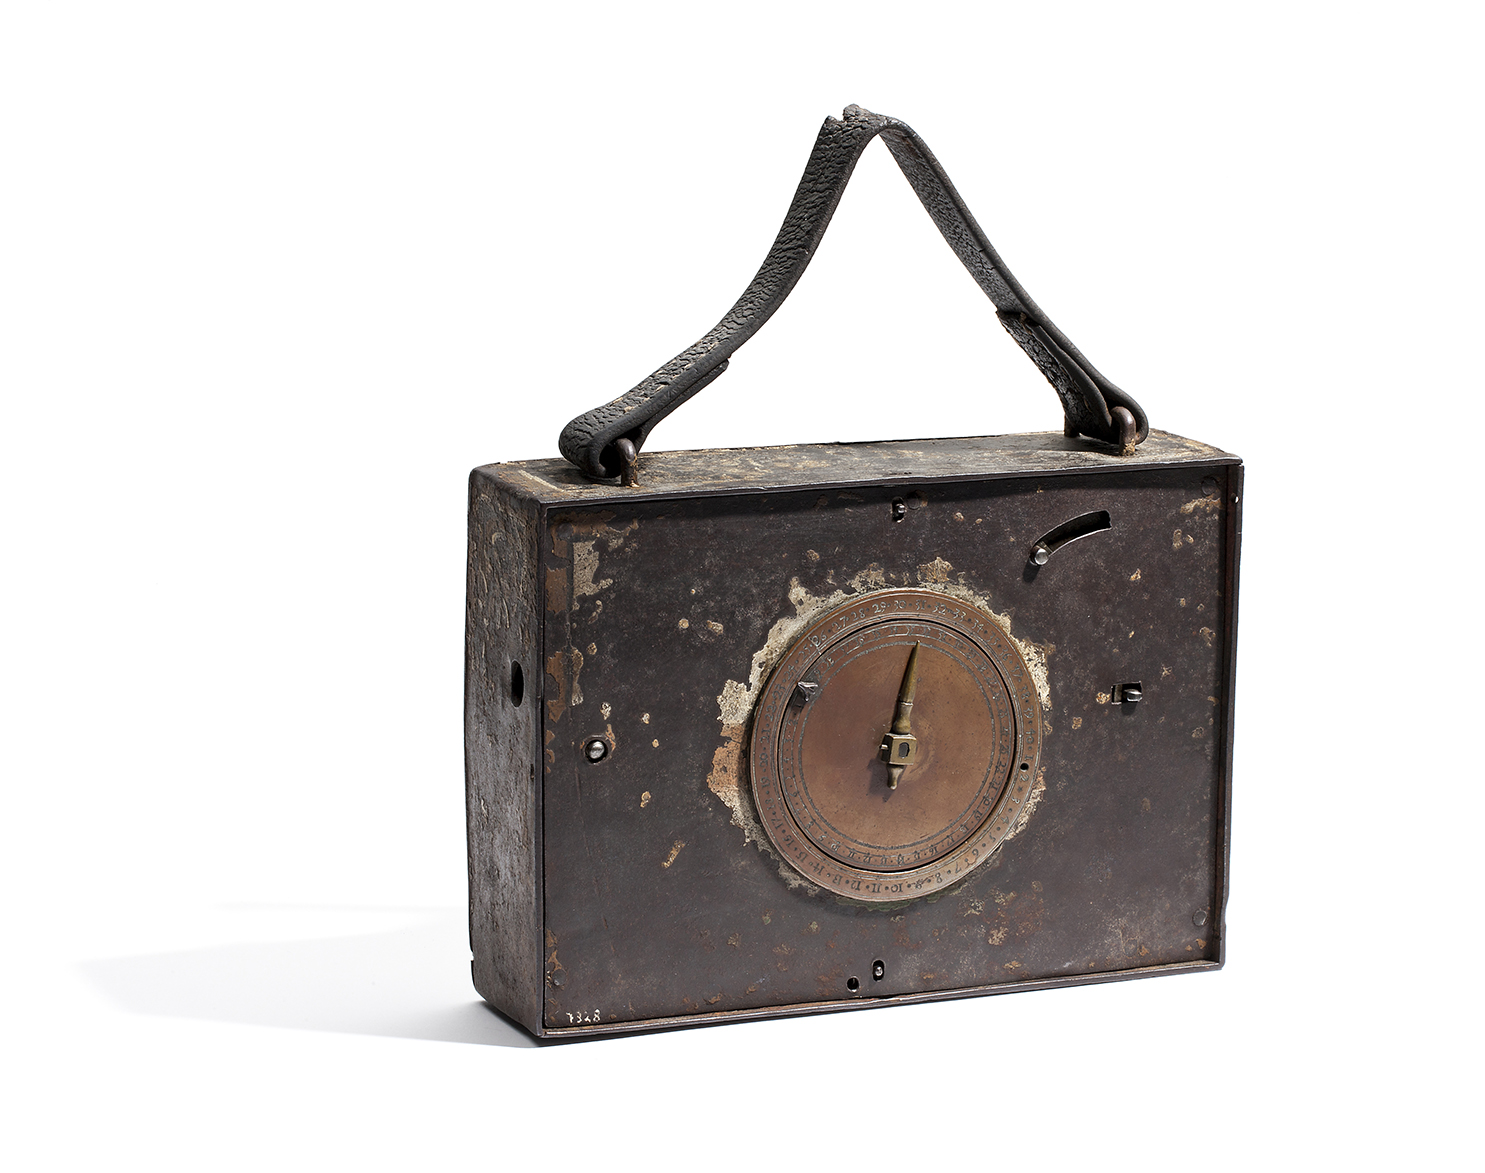 A metal box with a copper clock-face. On the top a leather handle.